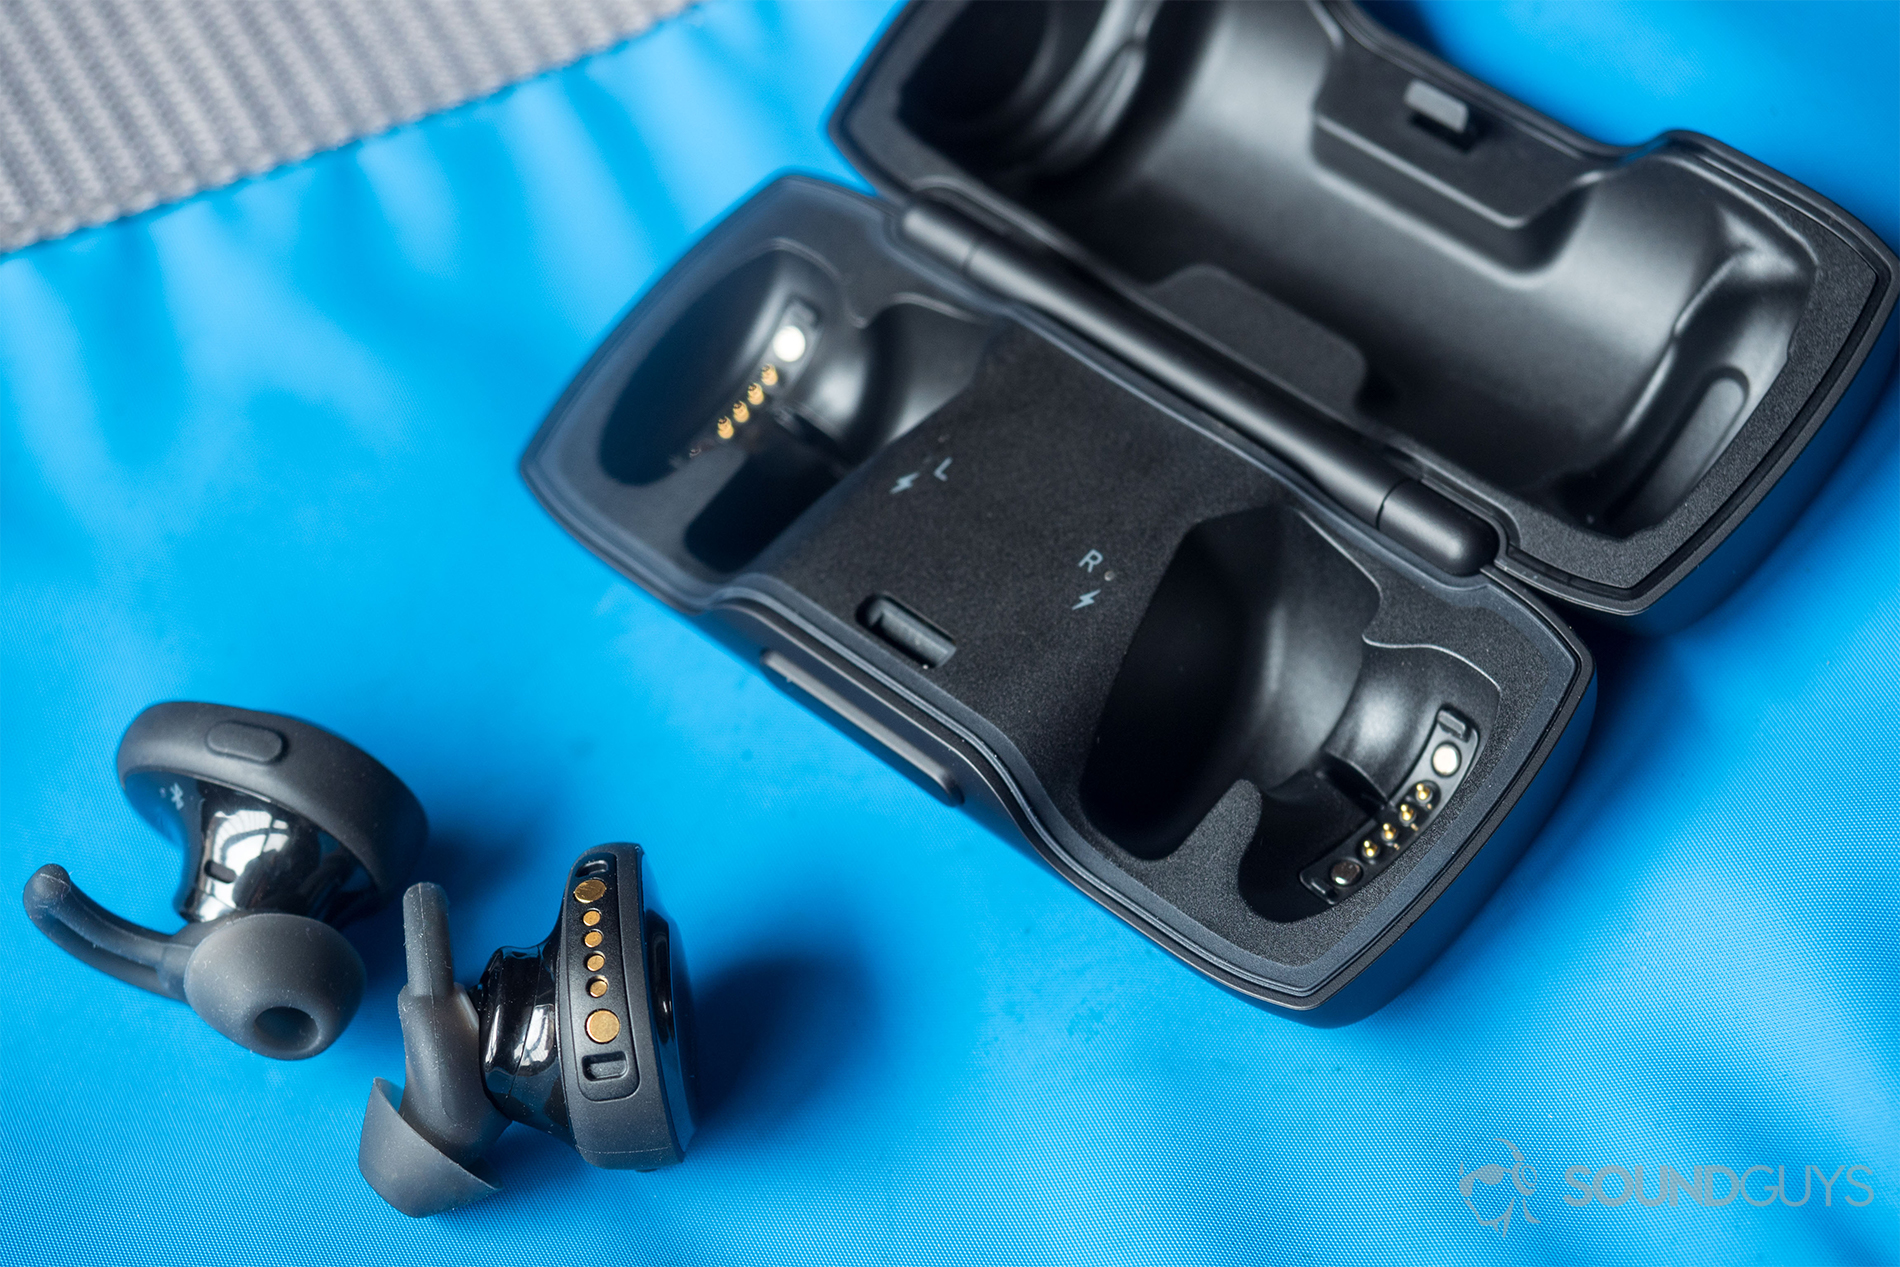 A photo of the Bose SoundSport Free true wireless workout earbuds outside of the open charging case on top of a blue surface.